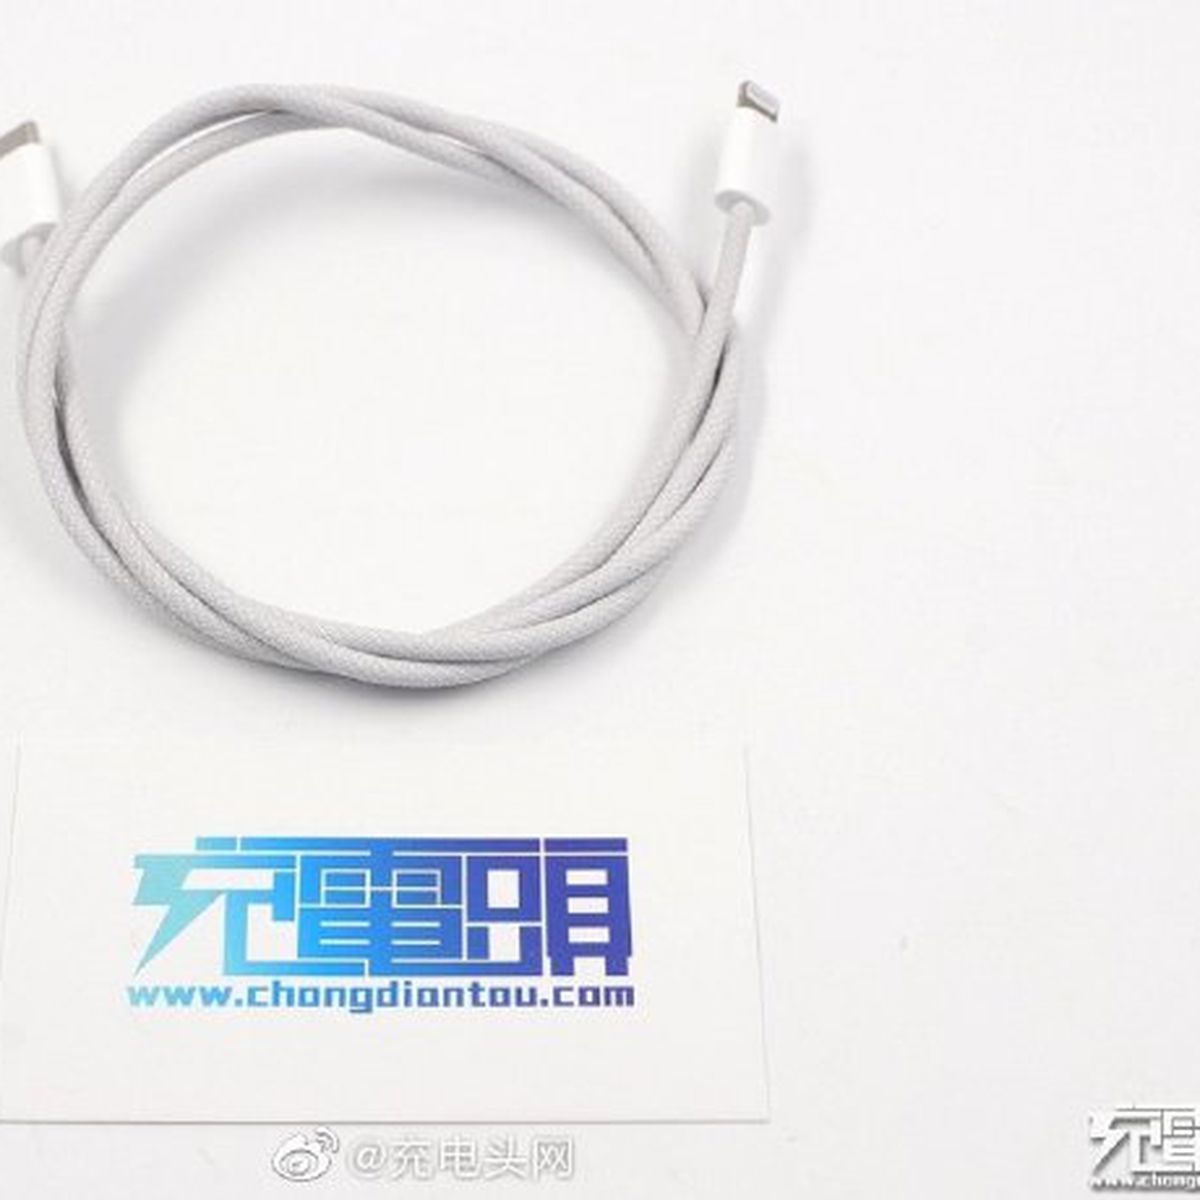 iPhone 12 Could Ship With New Braided USB-C to Lightning Cable - MacRumors